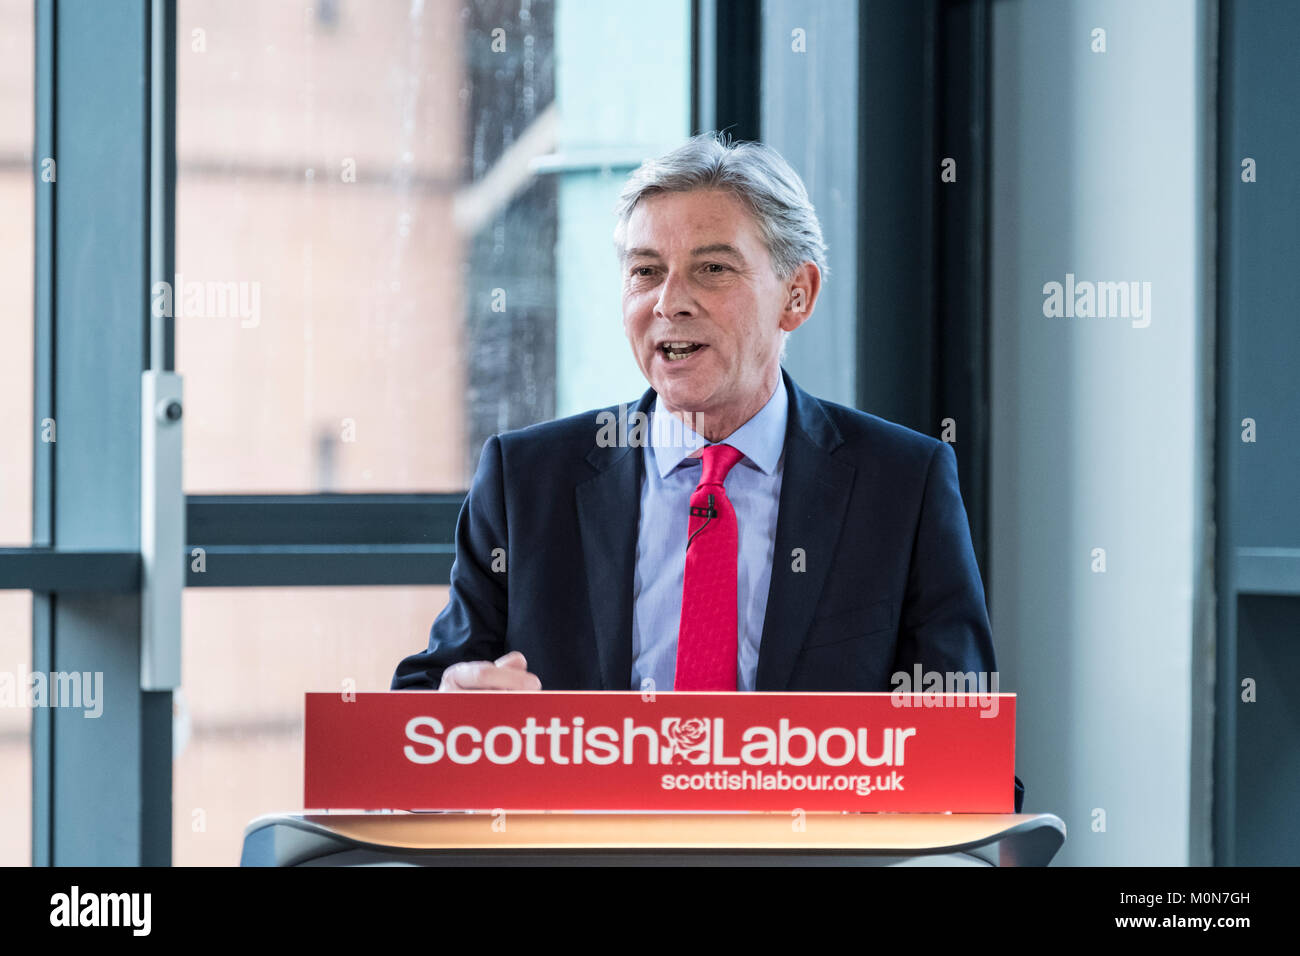 Scottish Labour Party Leader Richard Leonard delivers  major speech at Abertay University,19 Jan 2018, in Dundee outlining Scottish Labour's policies. Stock Photo